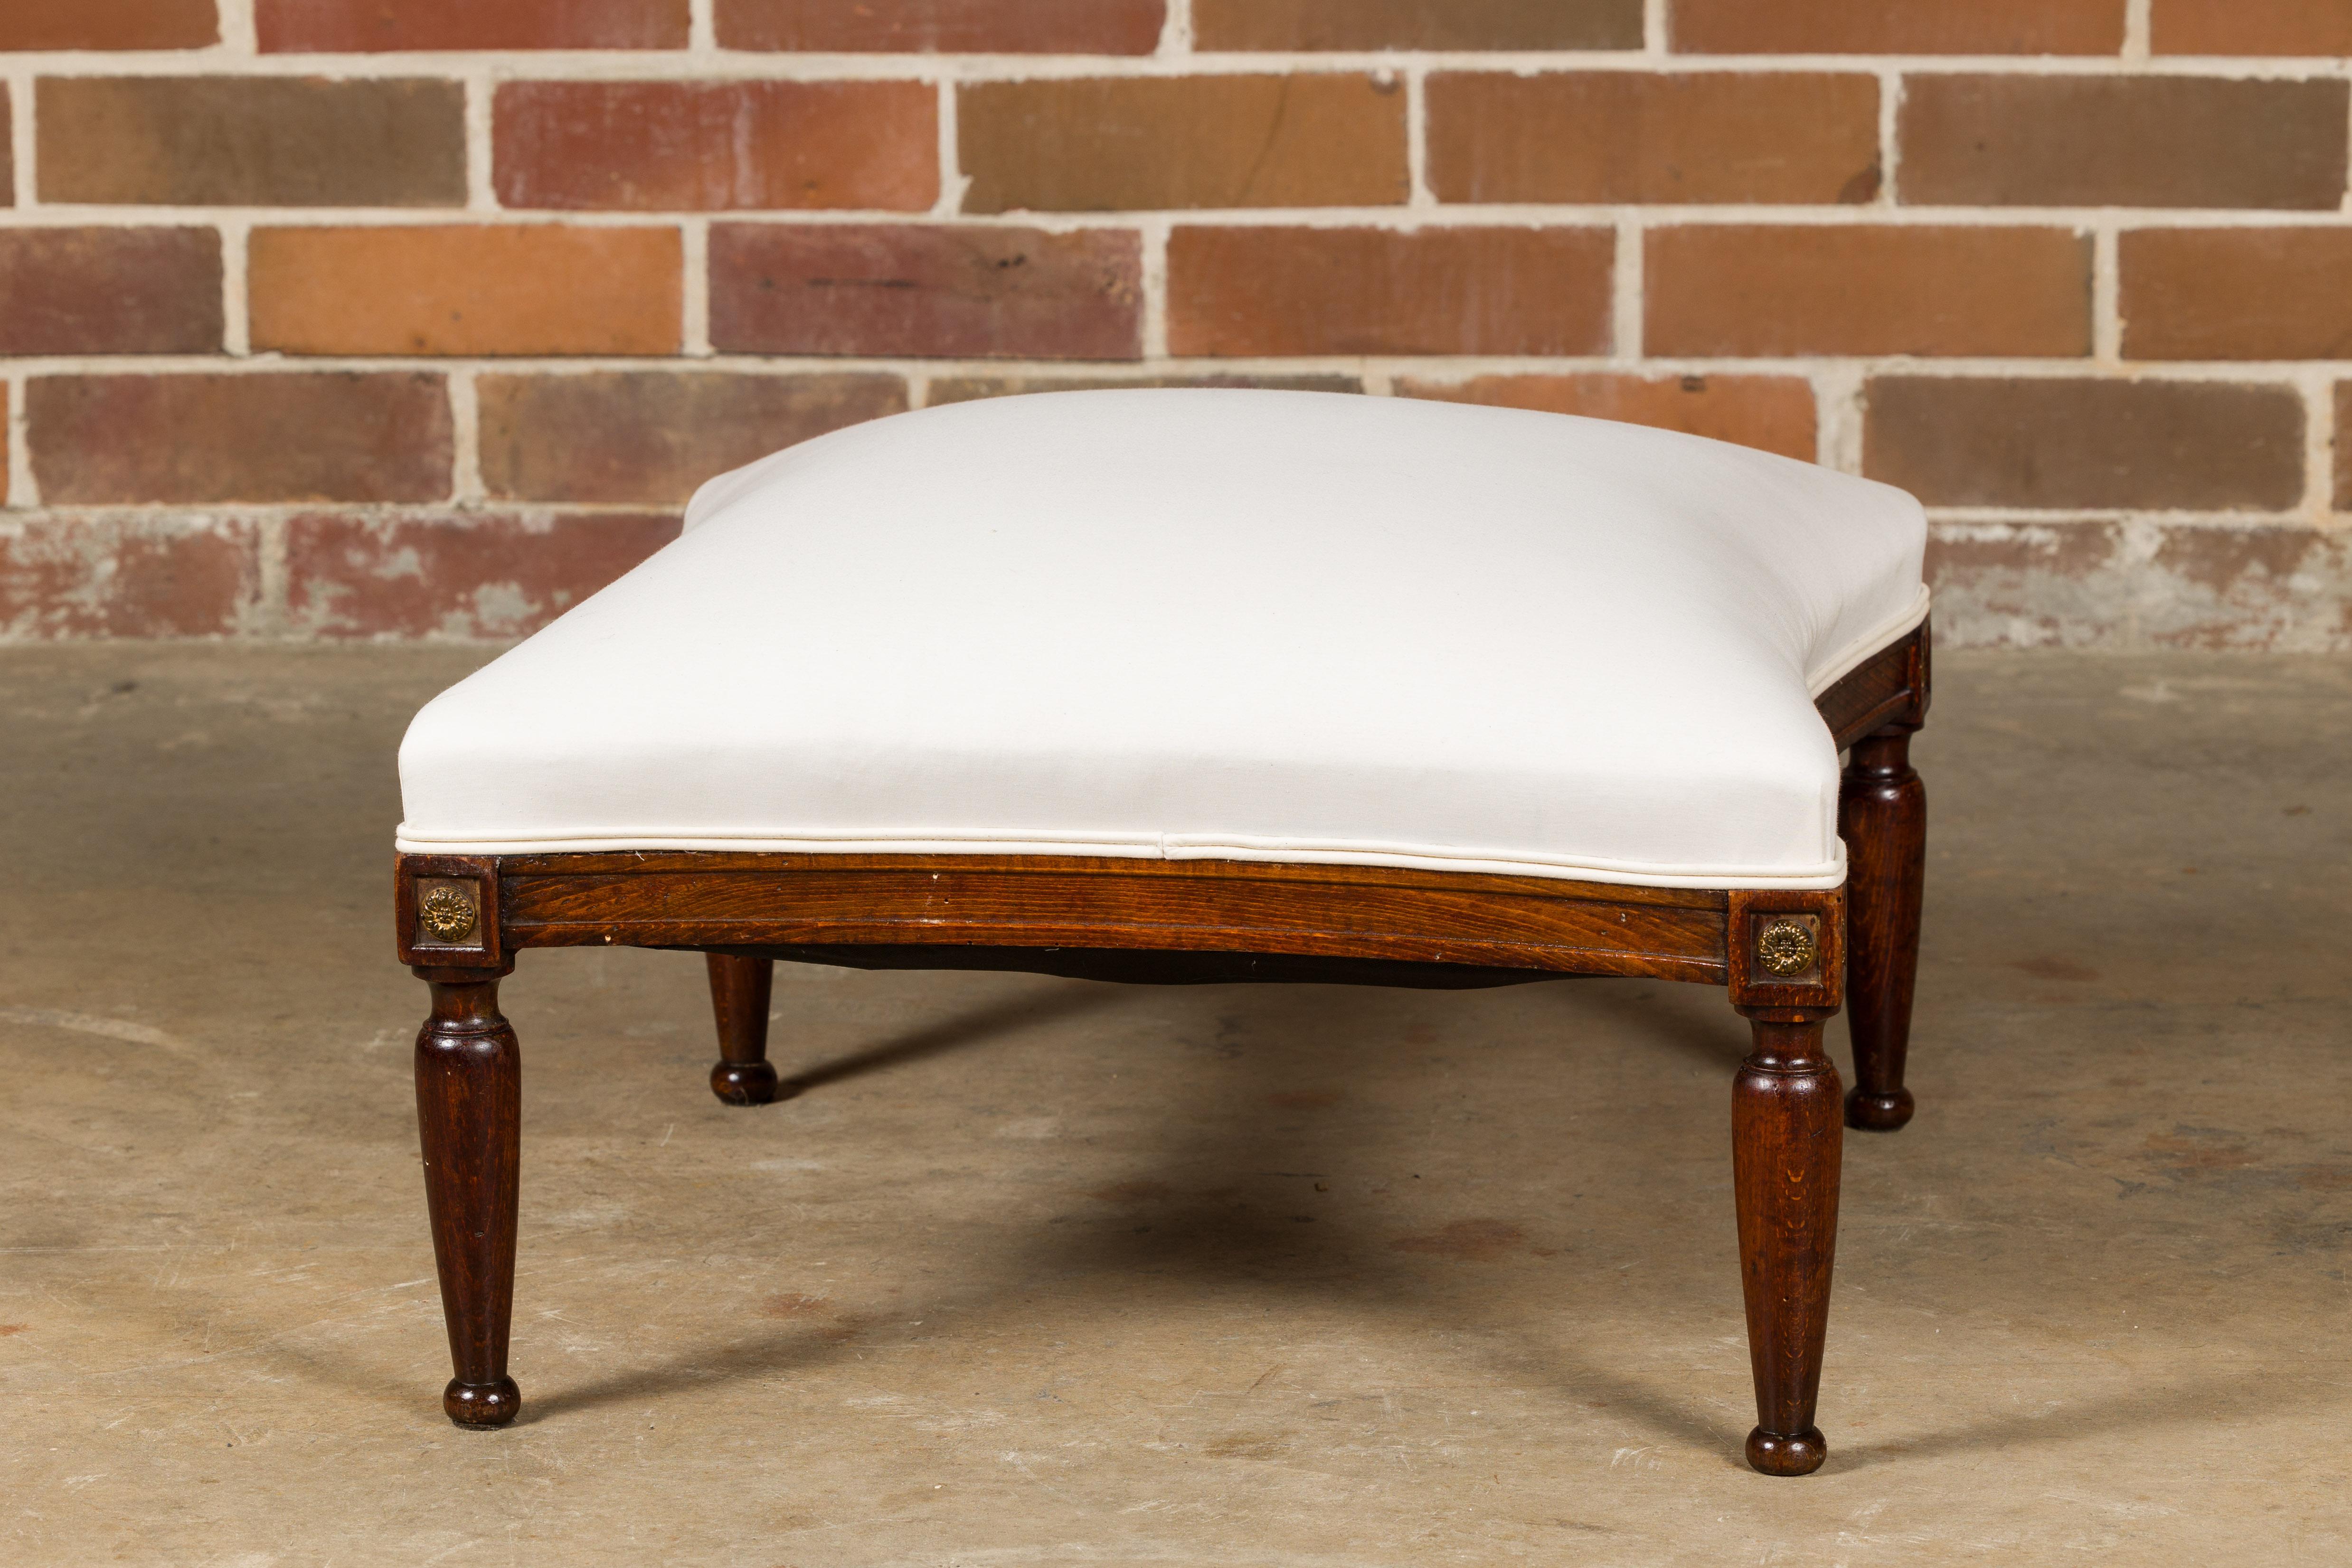 French Turn of the Century Ottoman with Giltwood Rosettes and Upholstery, 1900s For Sale 1